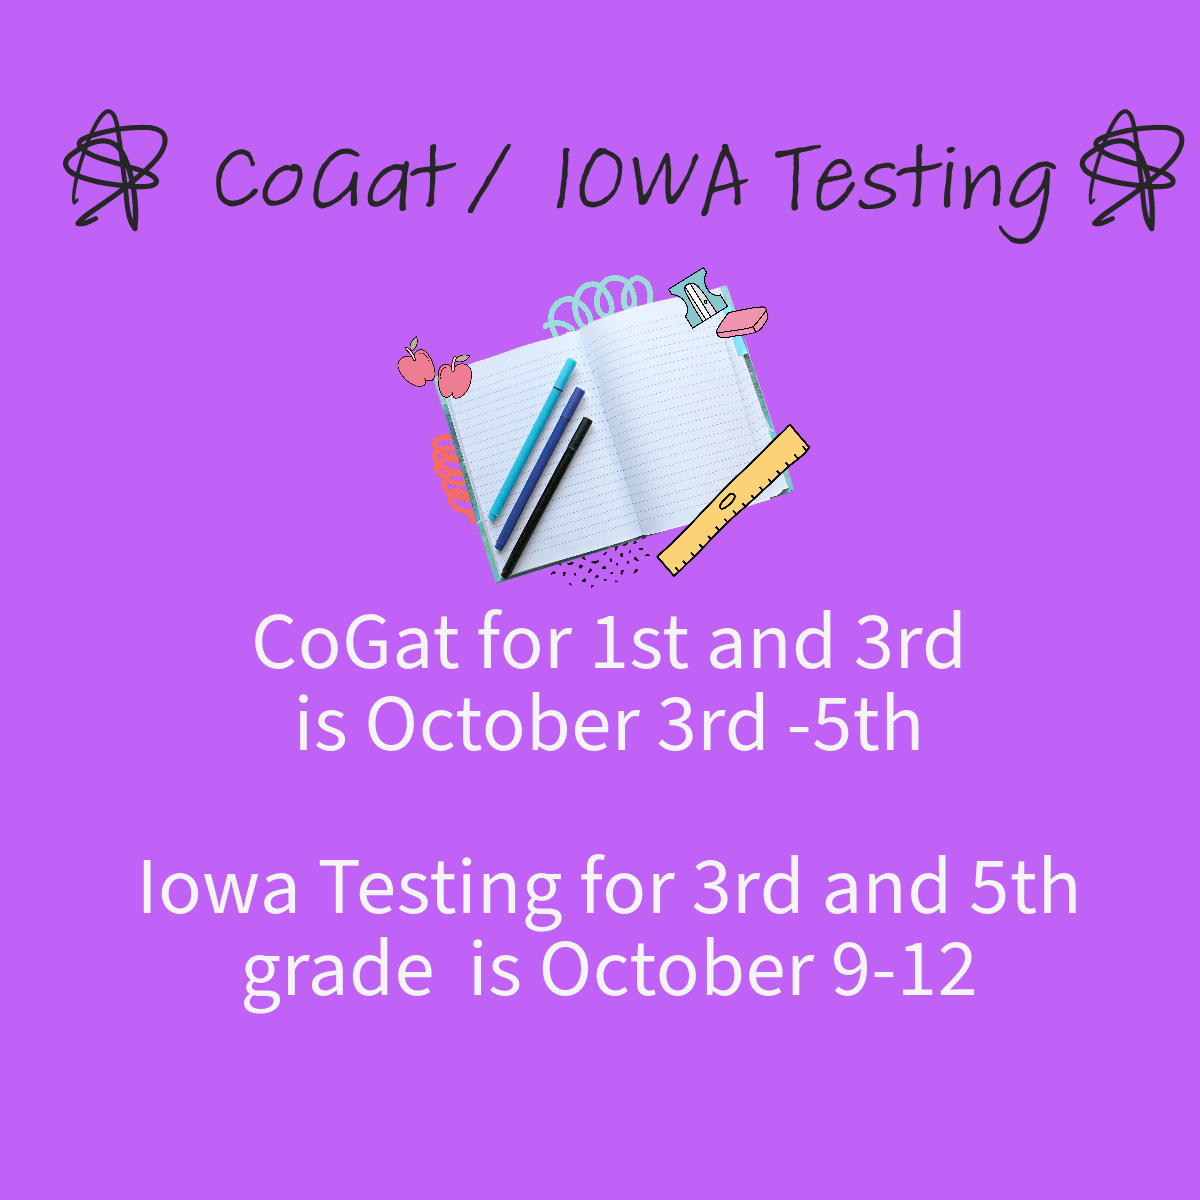 COgat%20and%20IOWA%20testing%20is%20October%203%20to%2012%20.png